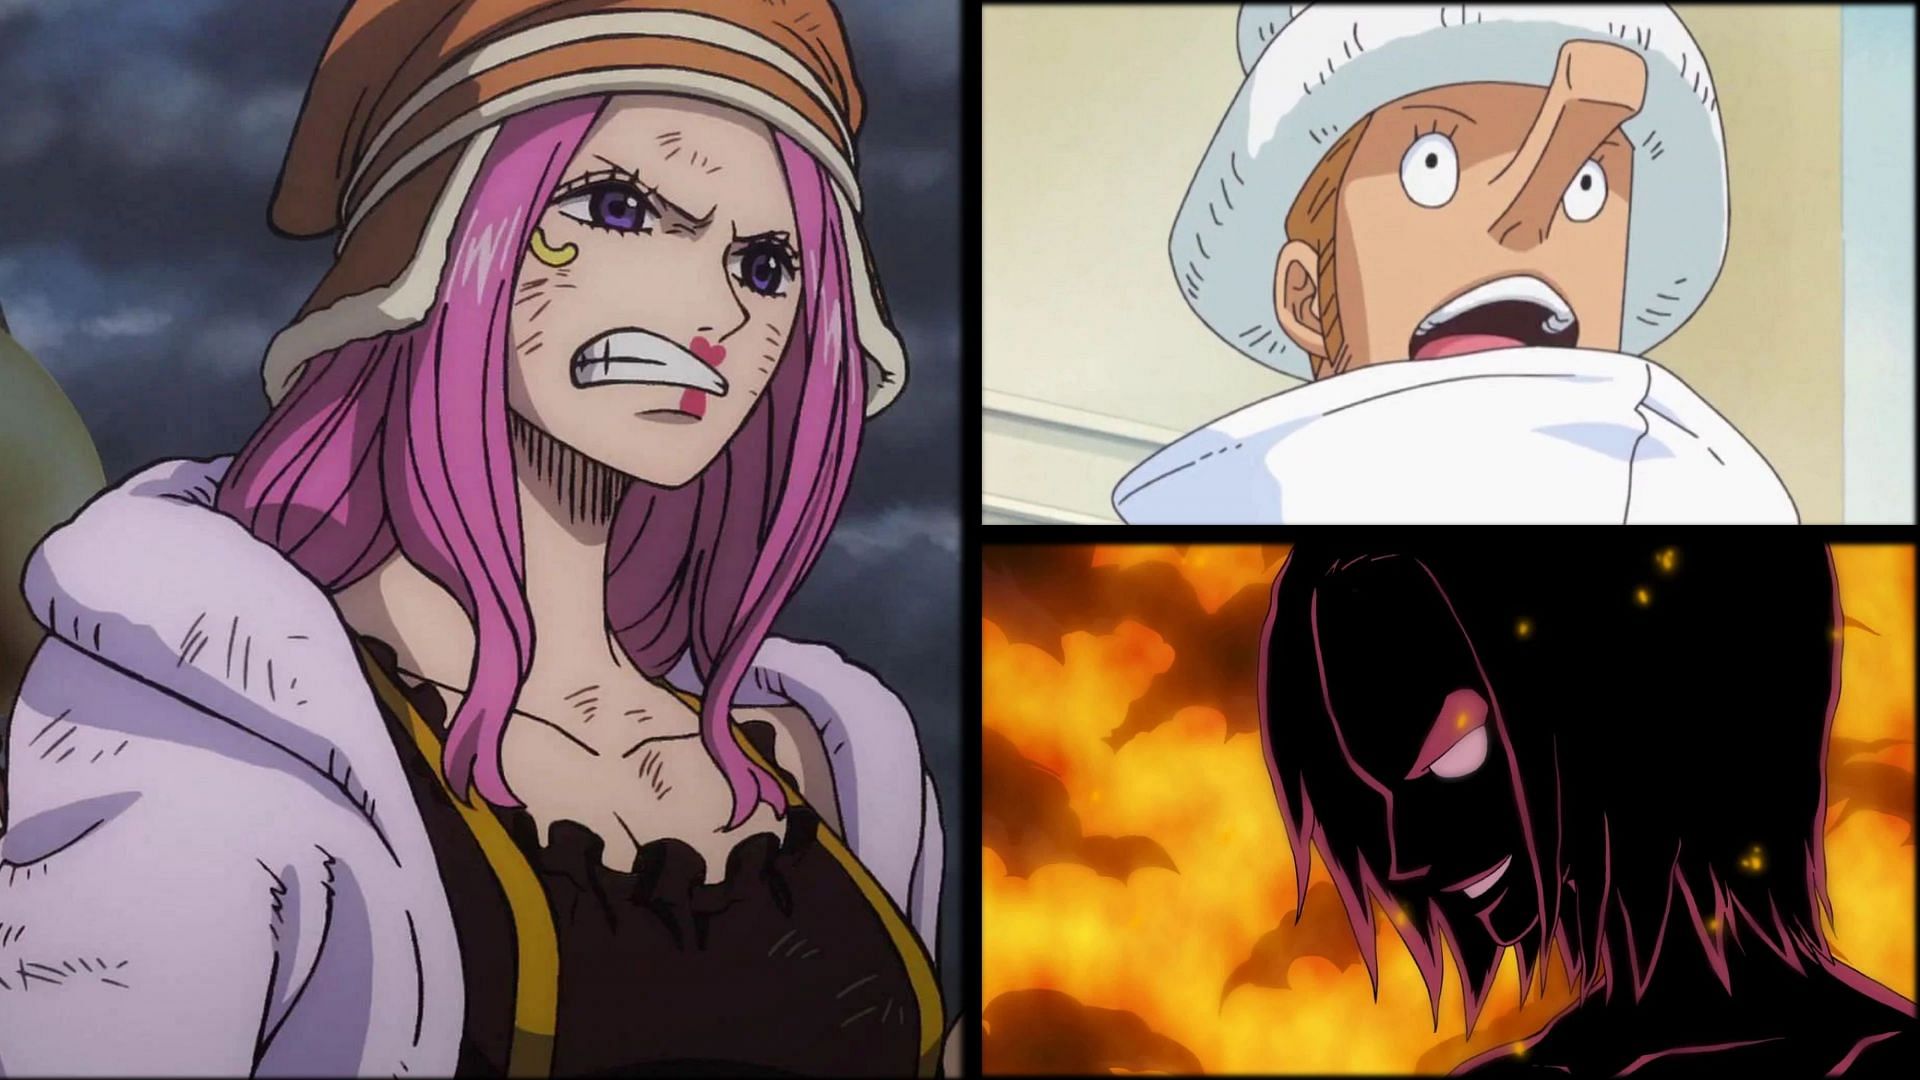 One Piece chapter 1062: Bonney's family ties, Lucci and Kaku return, and  more